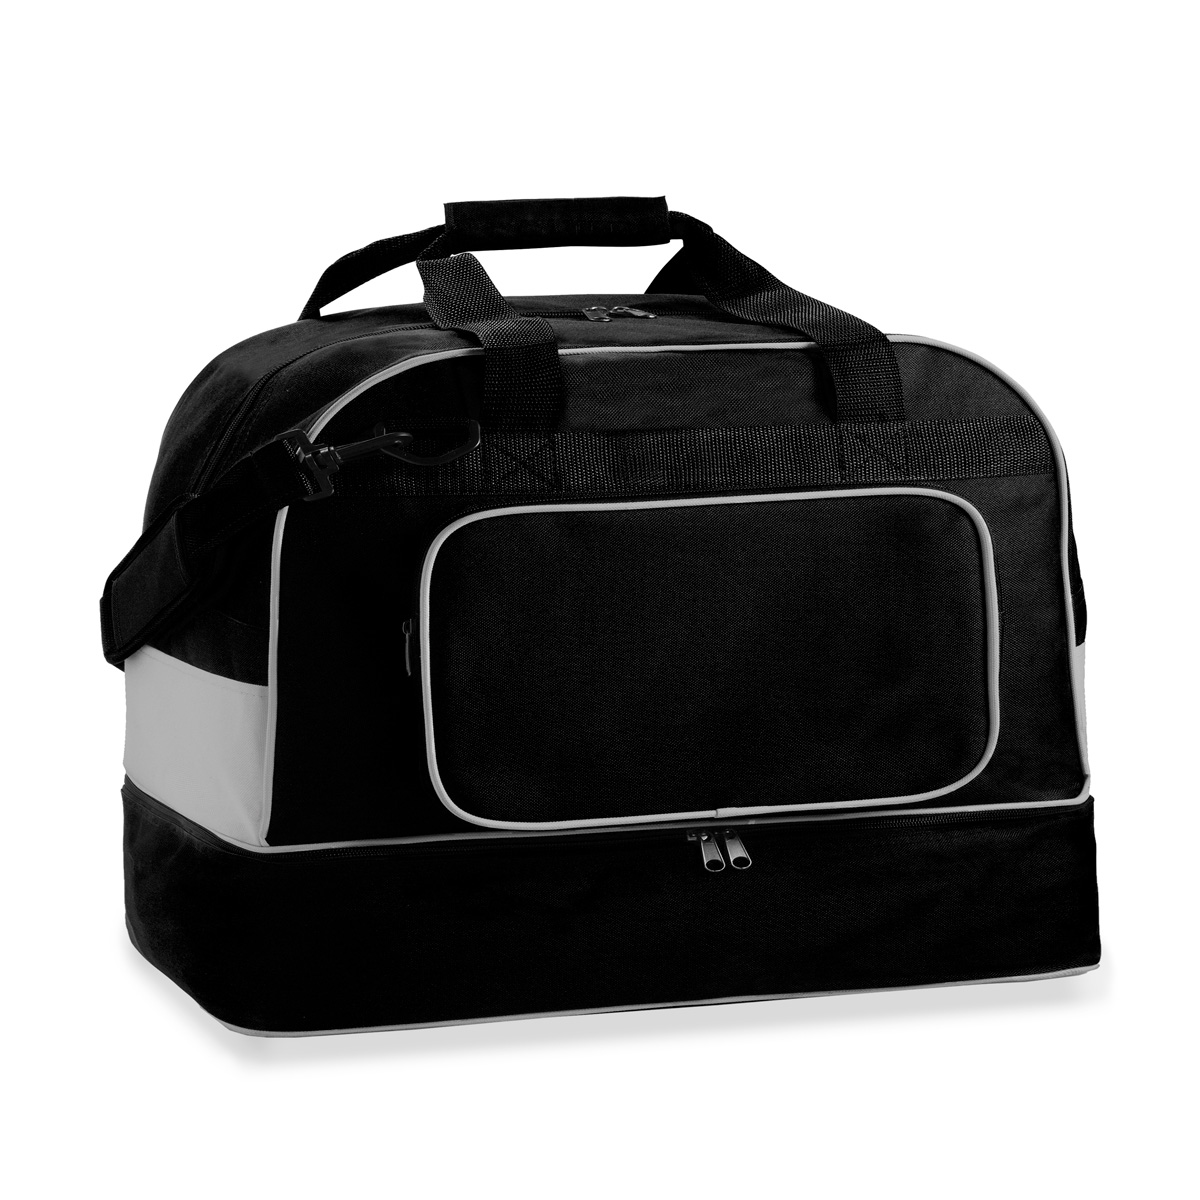 Double Decker Two Tone Bag Product Image